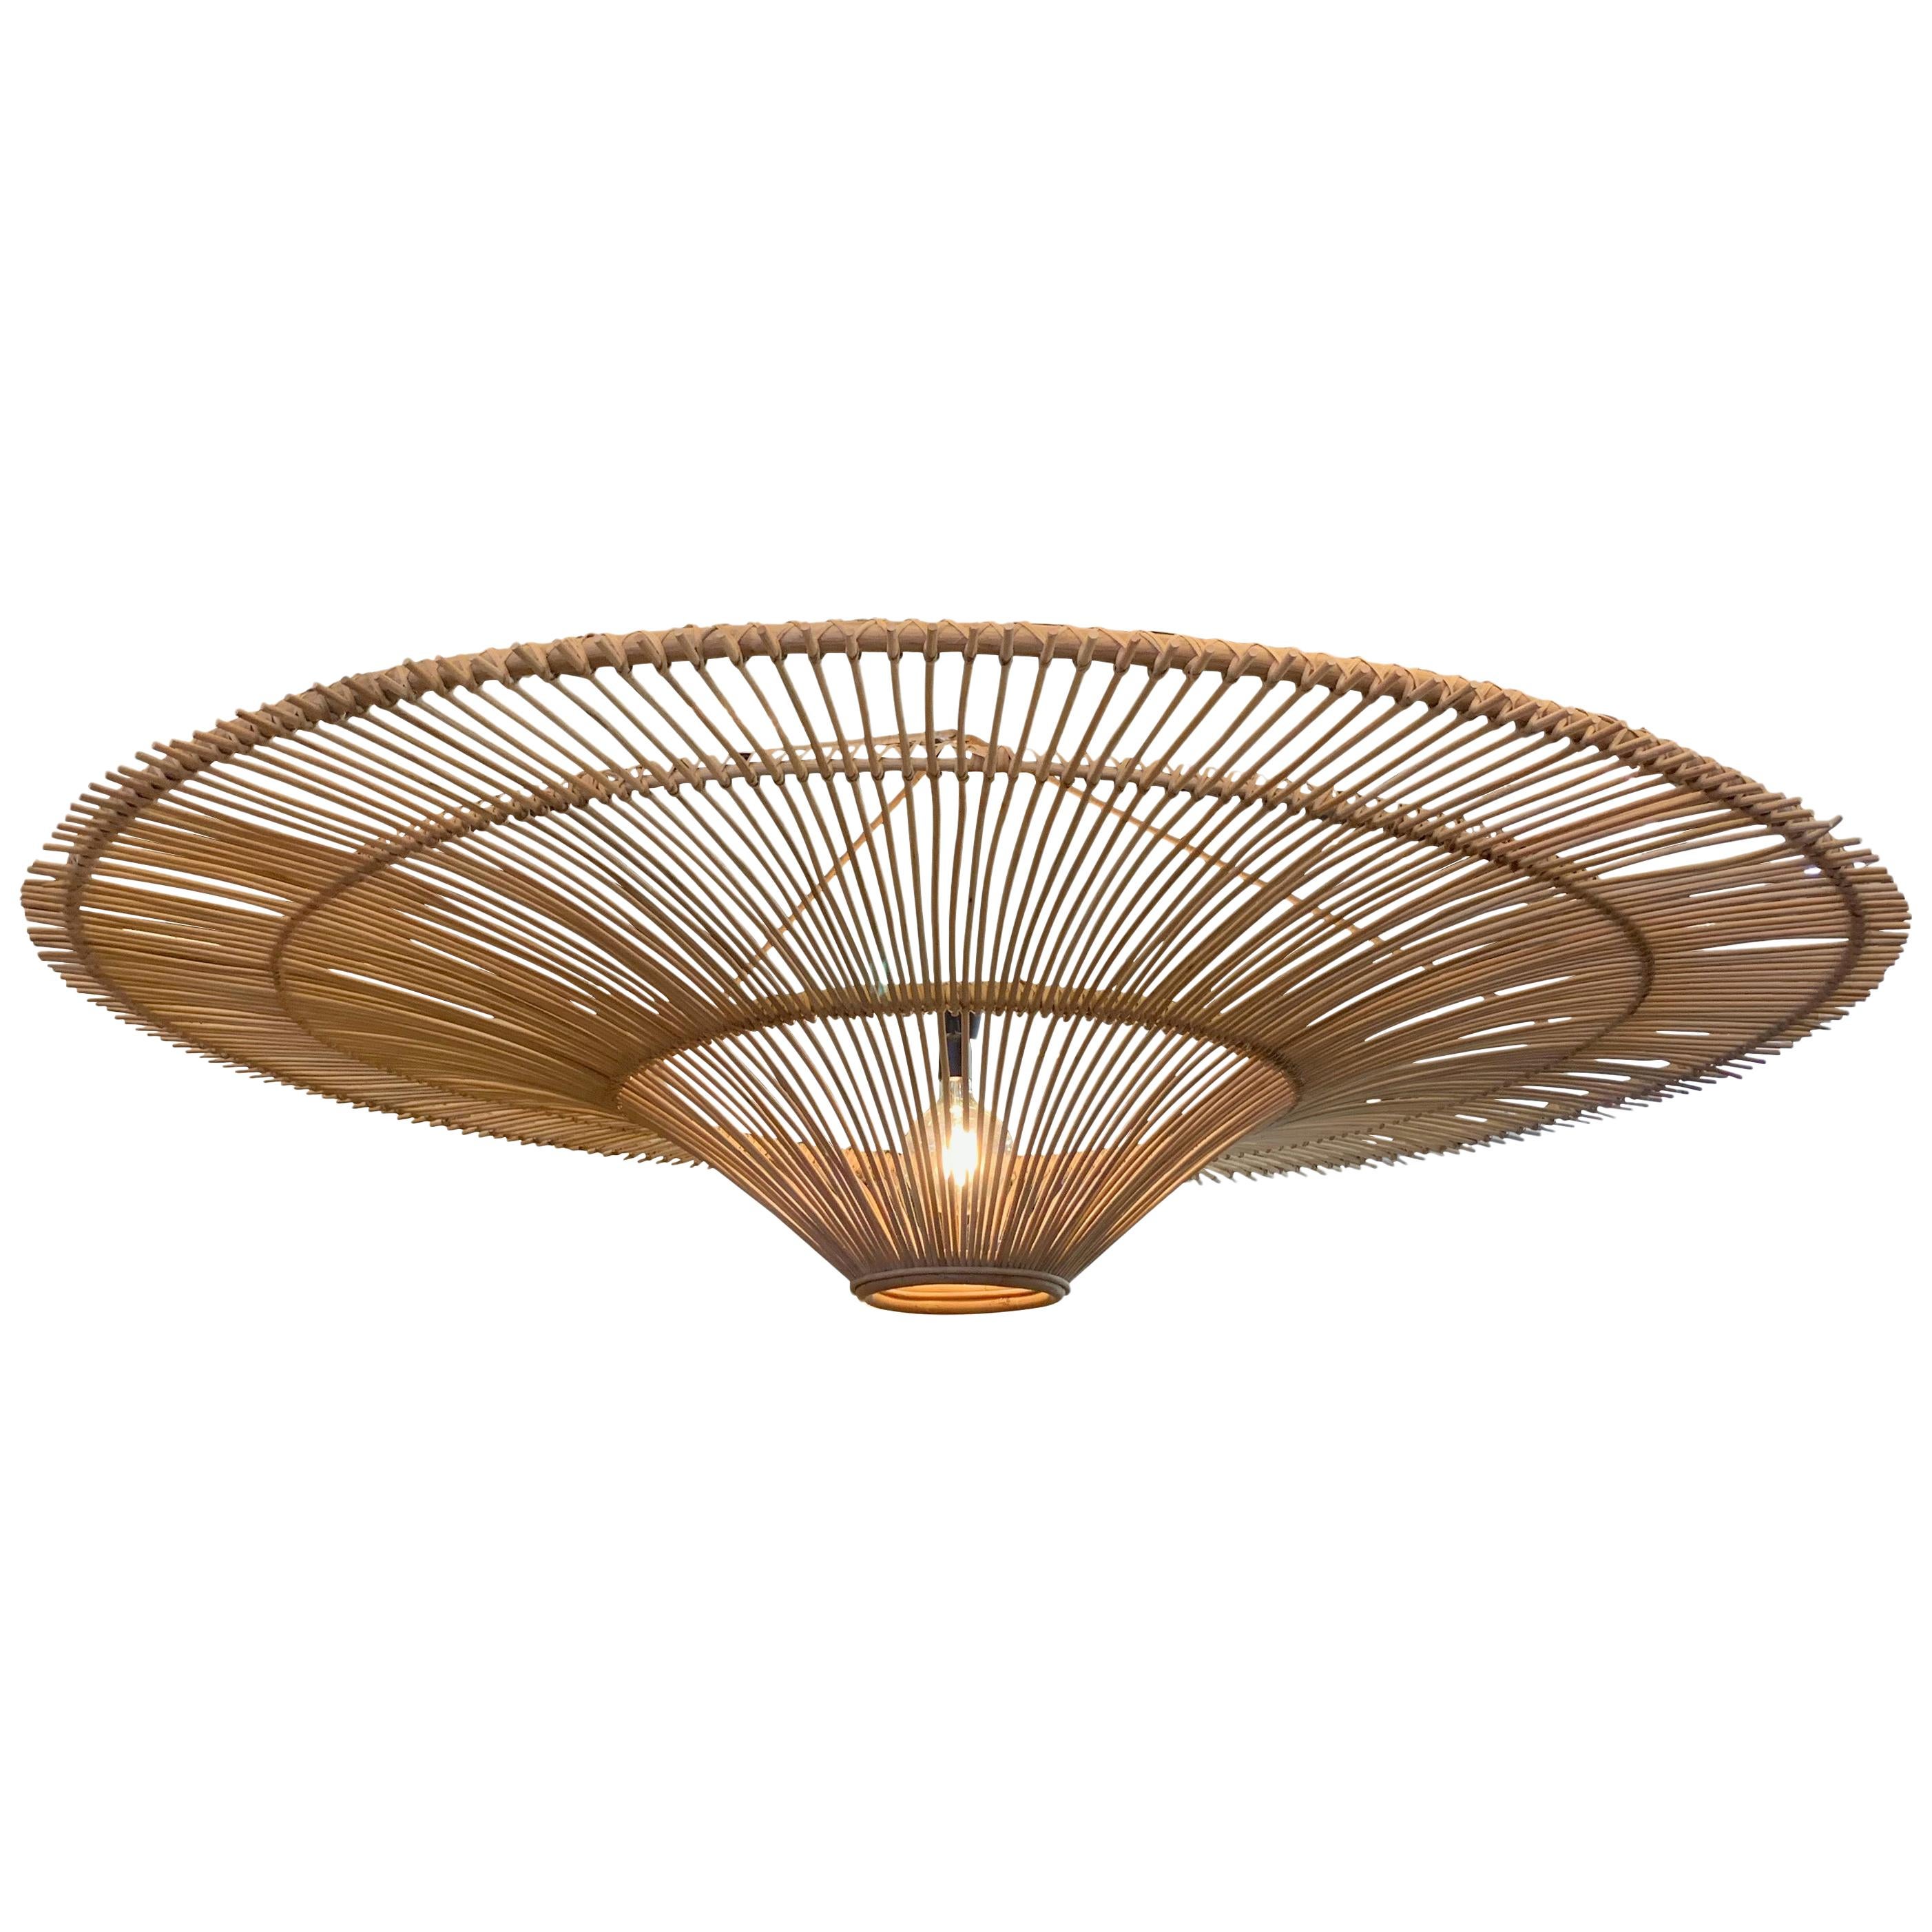 Large Umbrella Shaped Bamboo Chandelier, Indonesia, Contemporary